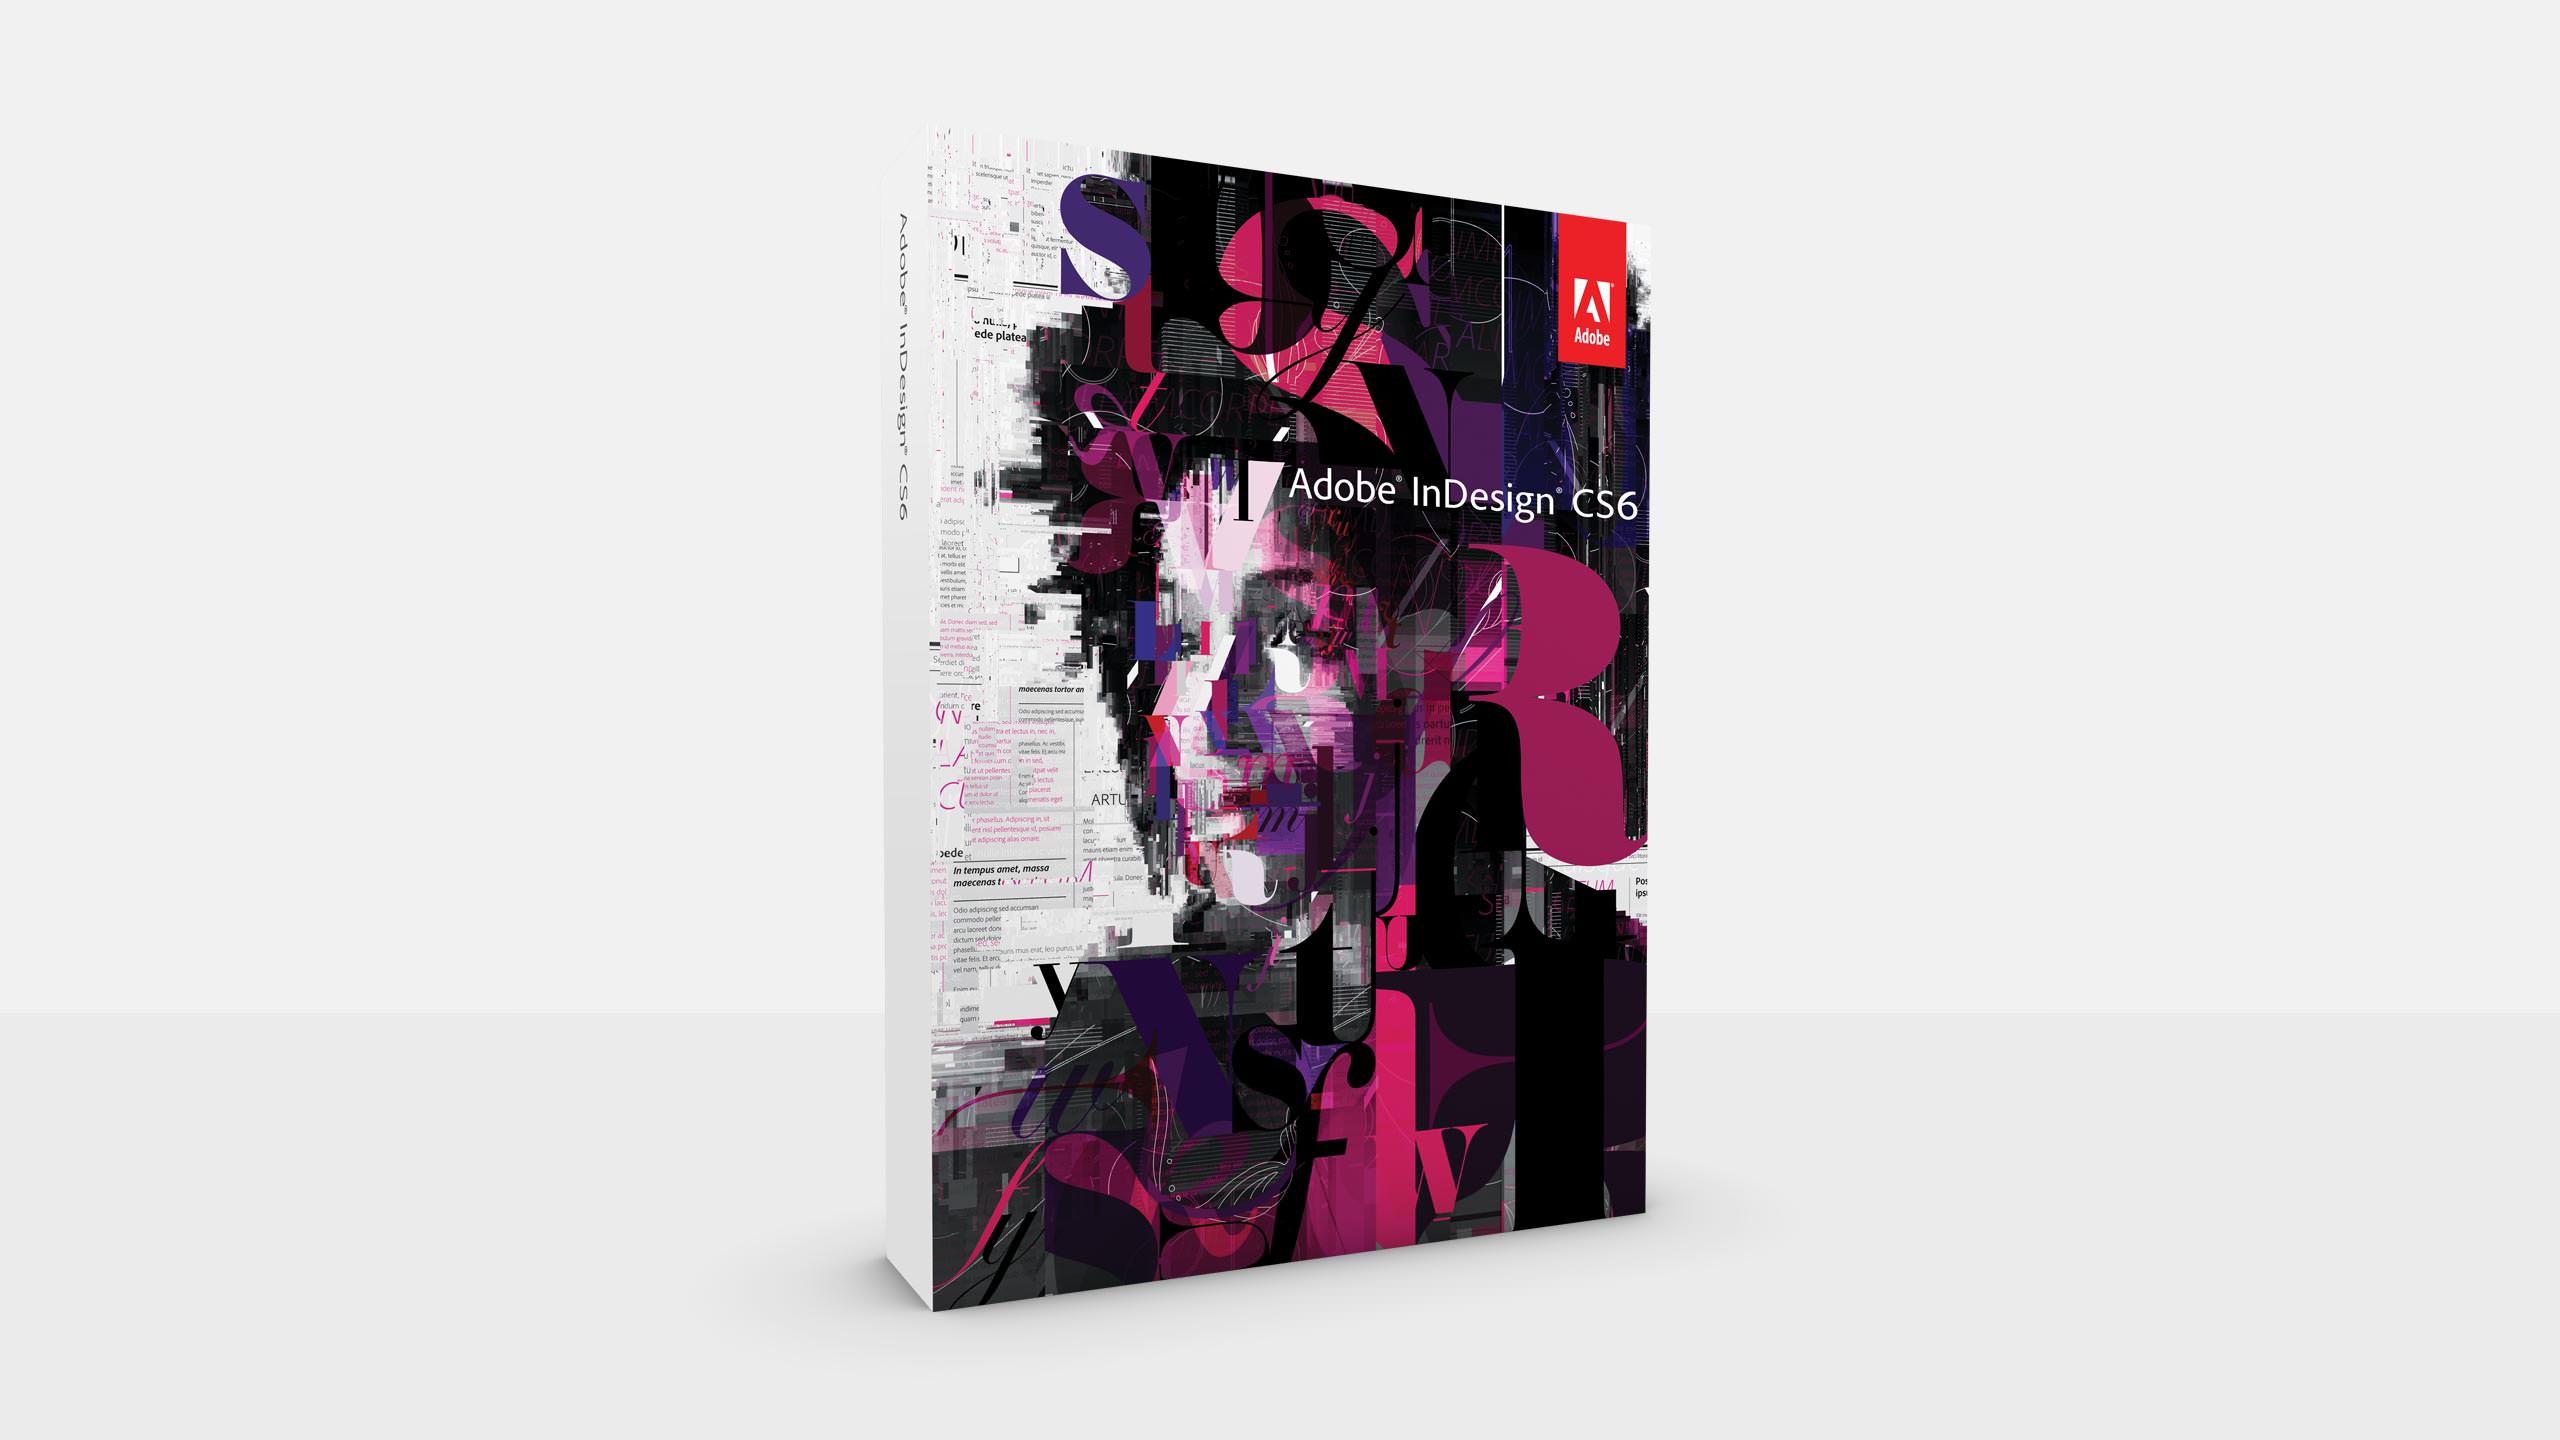 Adobe CS6 InDesign Campaign Product Packaging